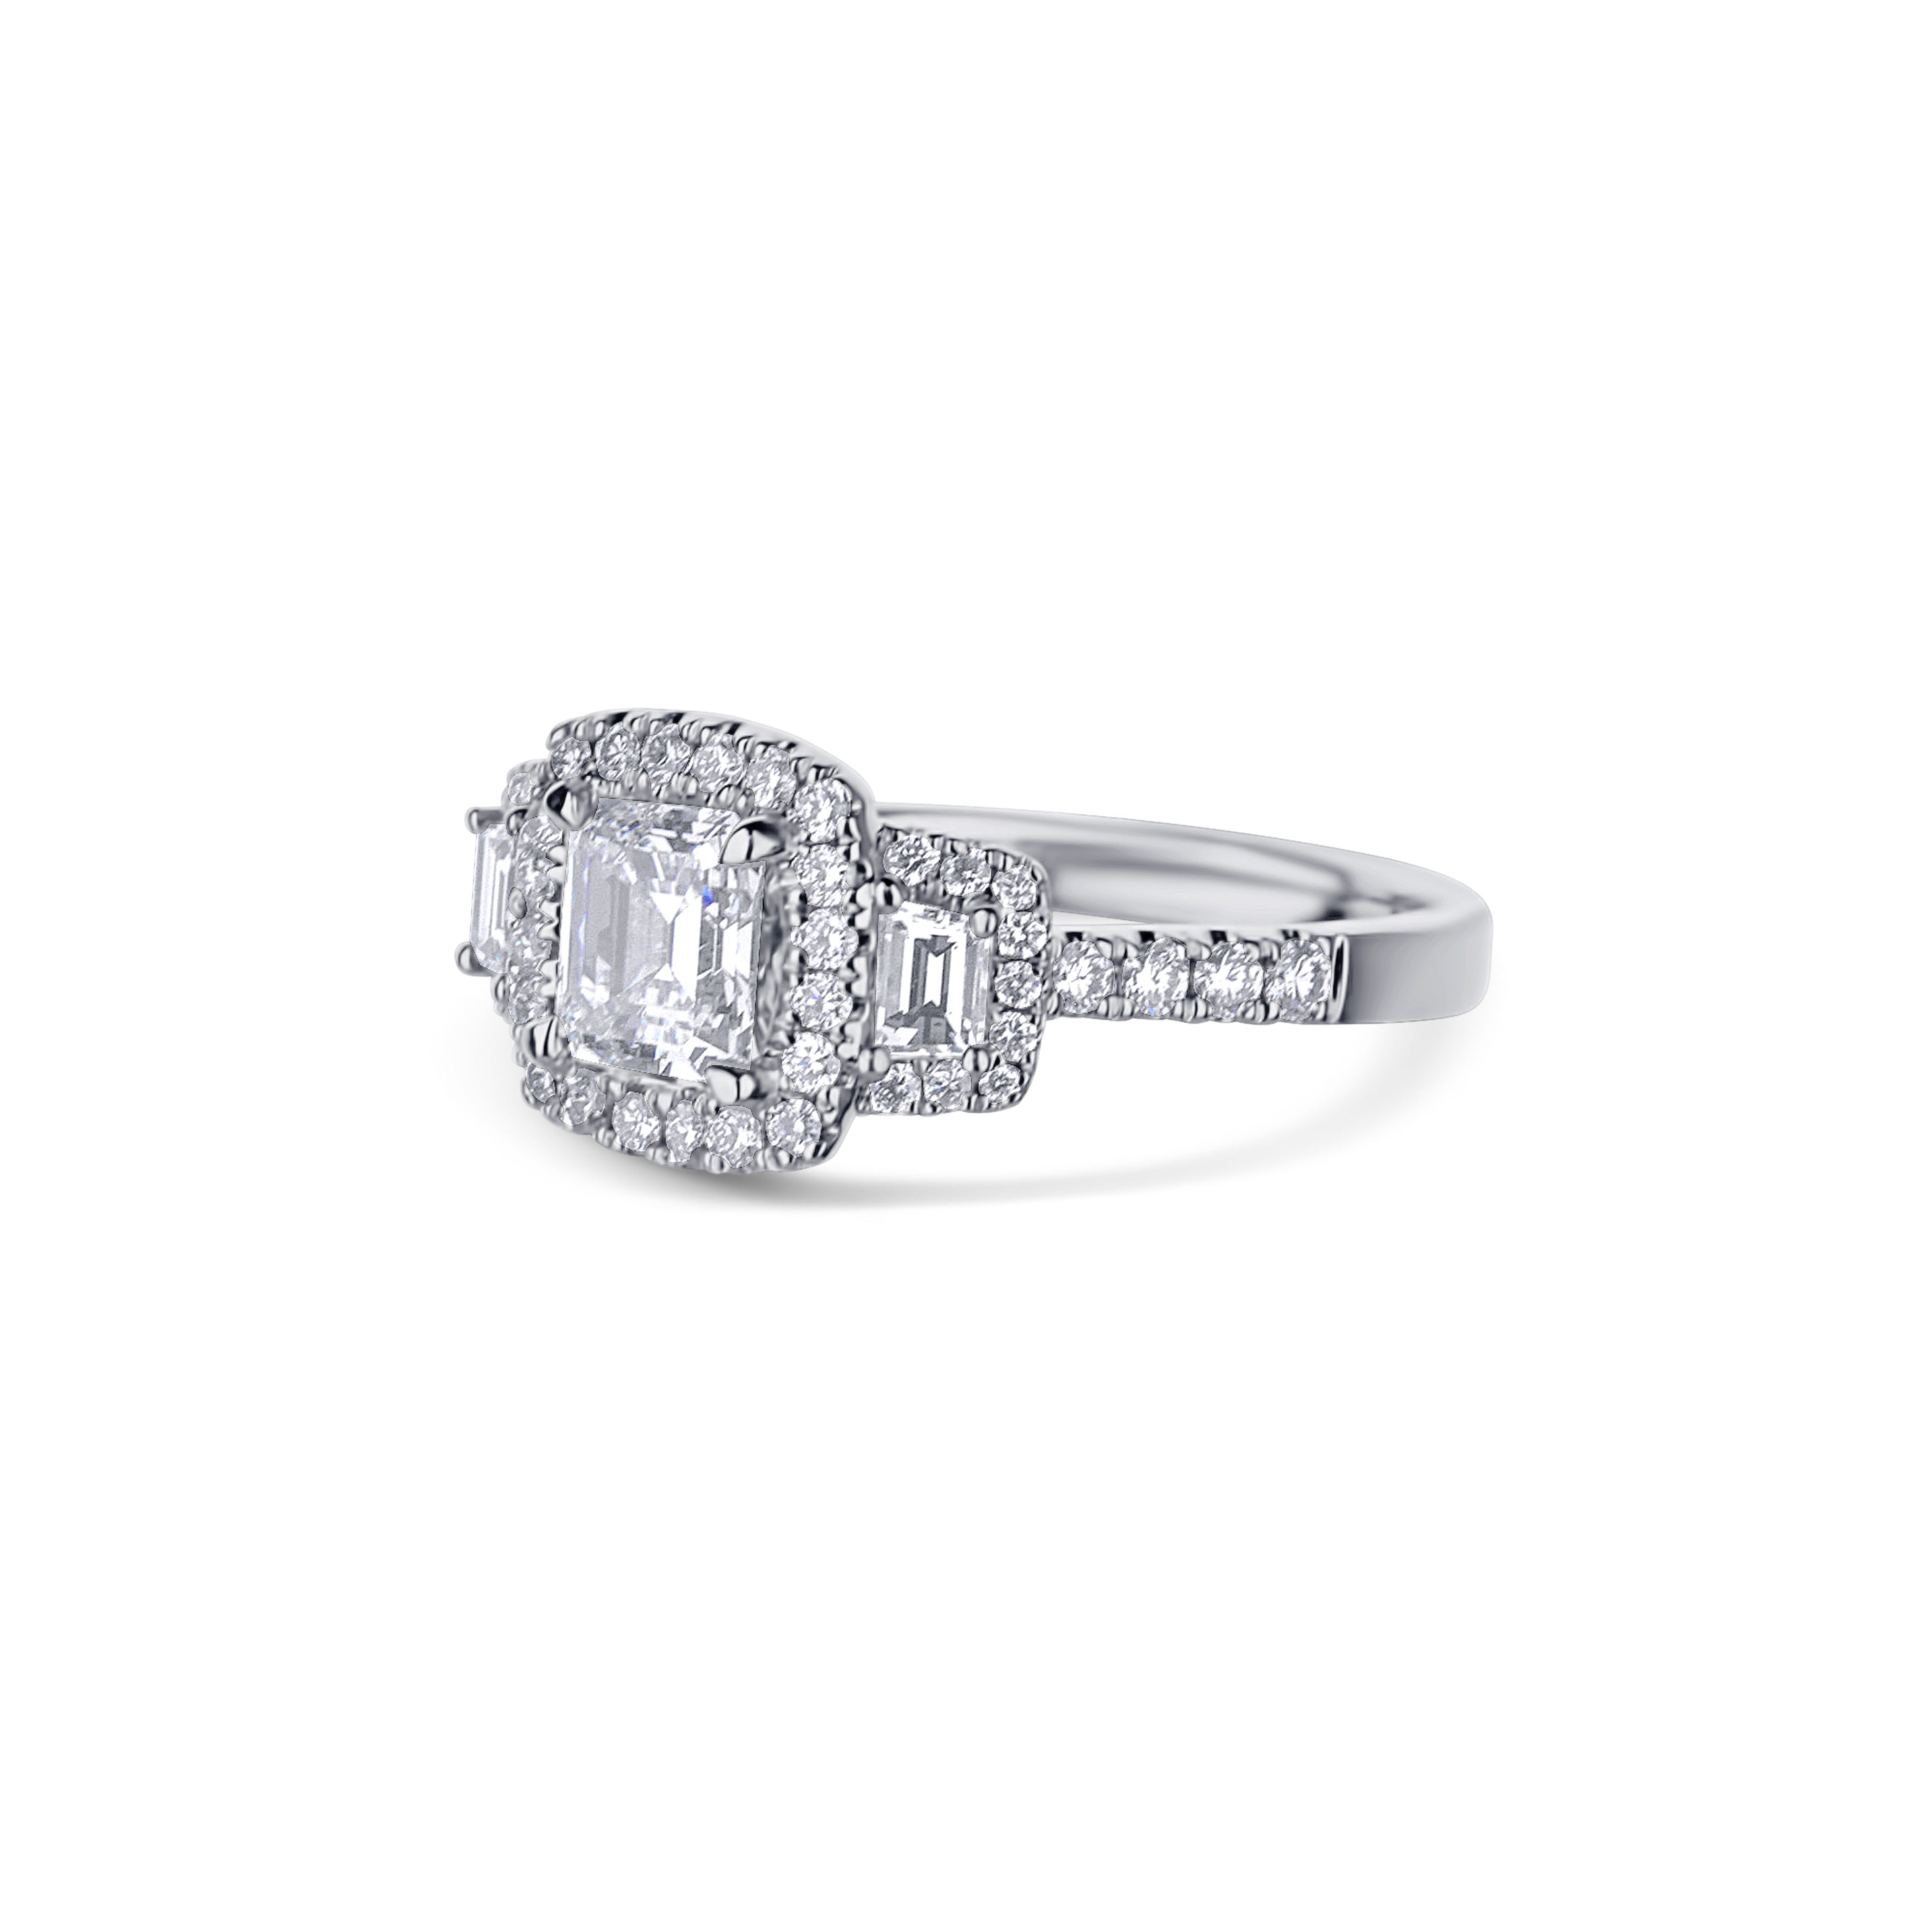 18K White Gold Three Stone Emerald Cut Diamond Engagement Ring With Halo & Diamonds In Side Shank